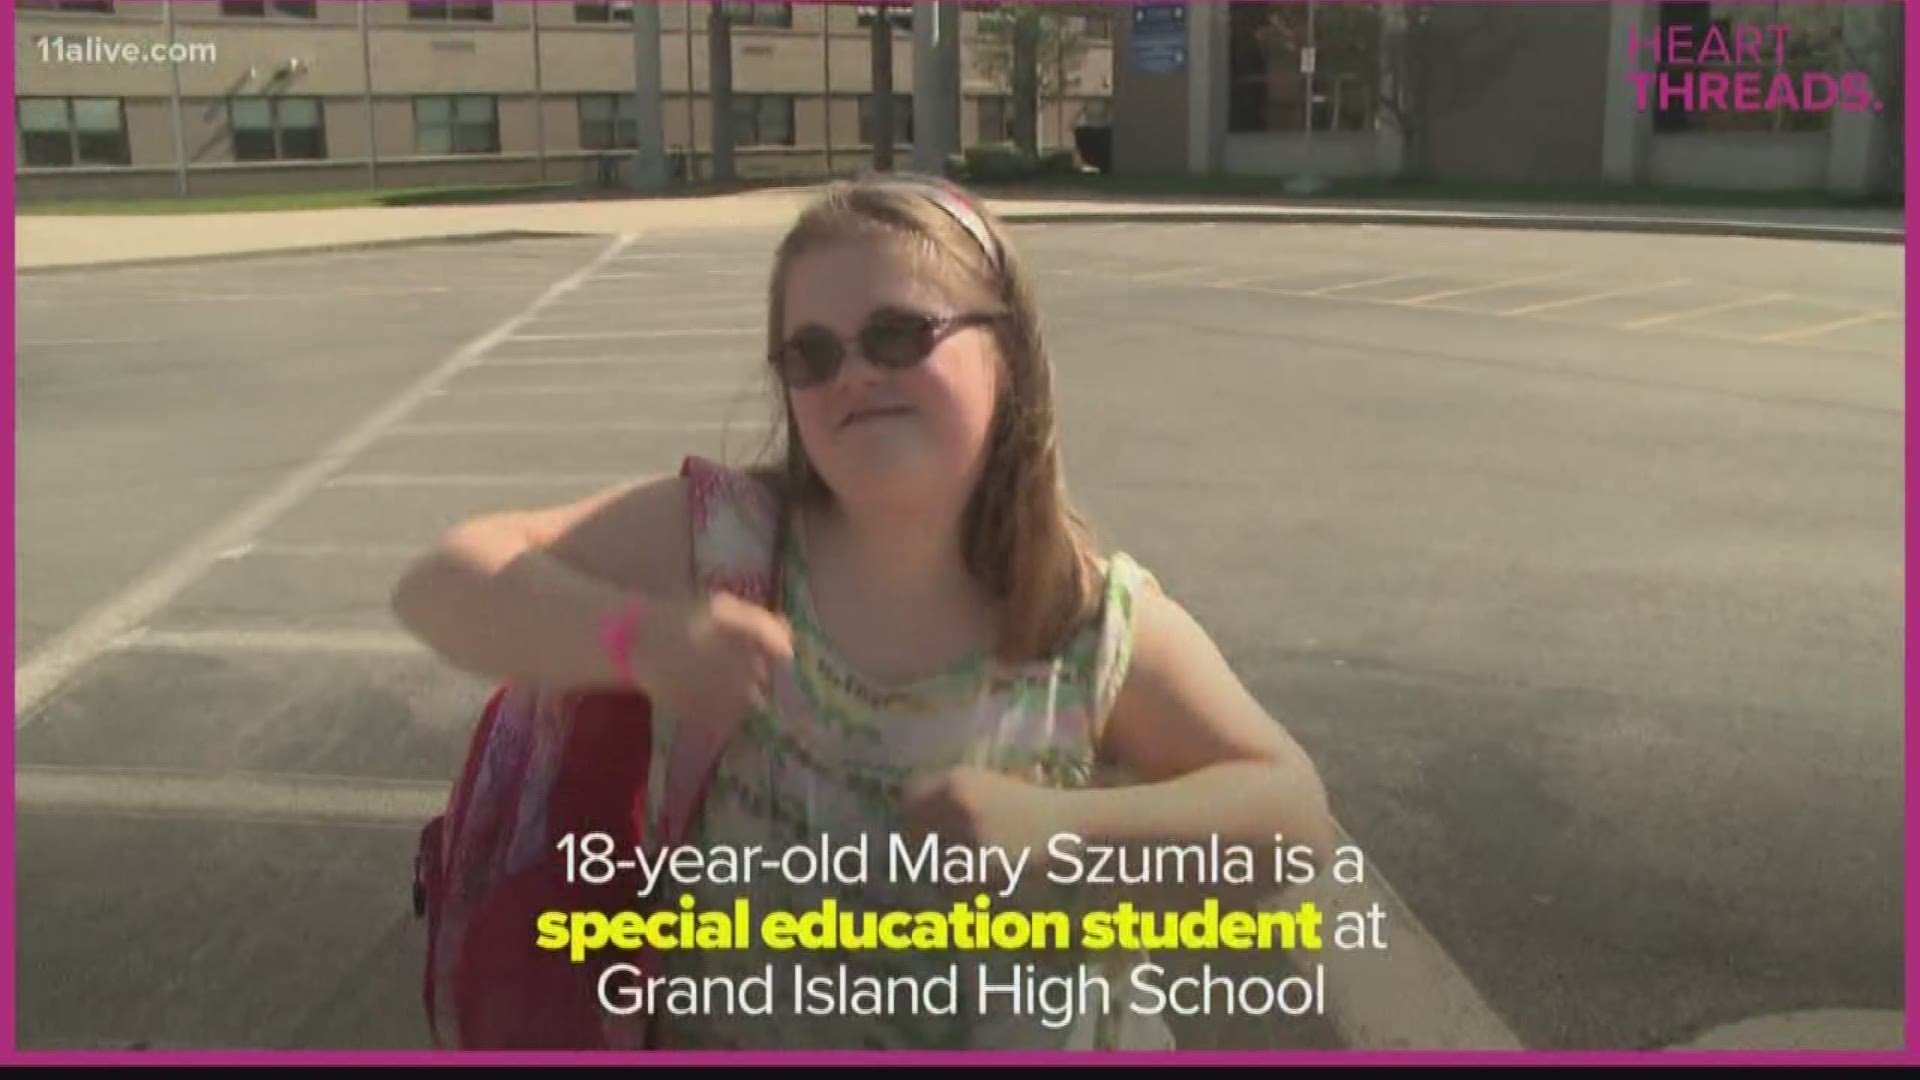 18-year-old Mary Szumla is a special education student at Grand Island High School.